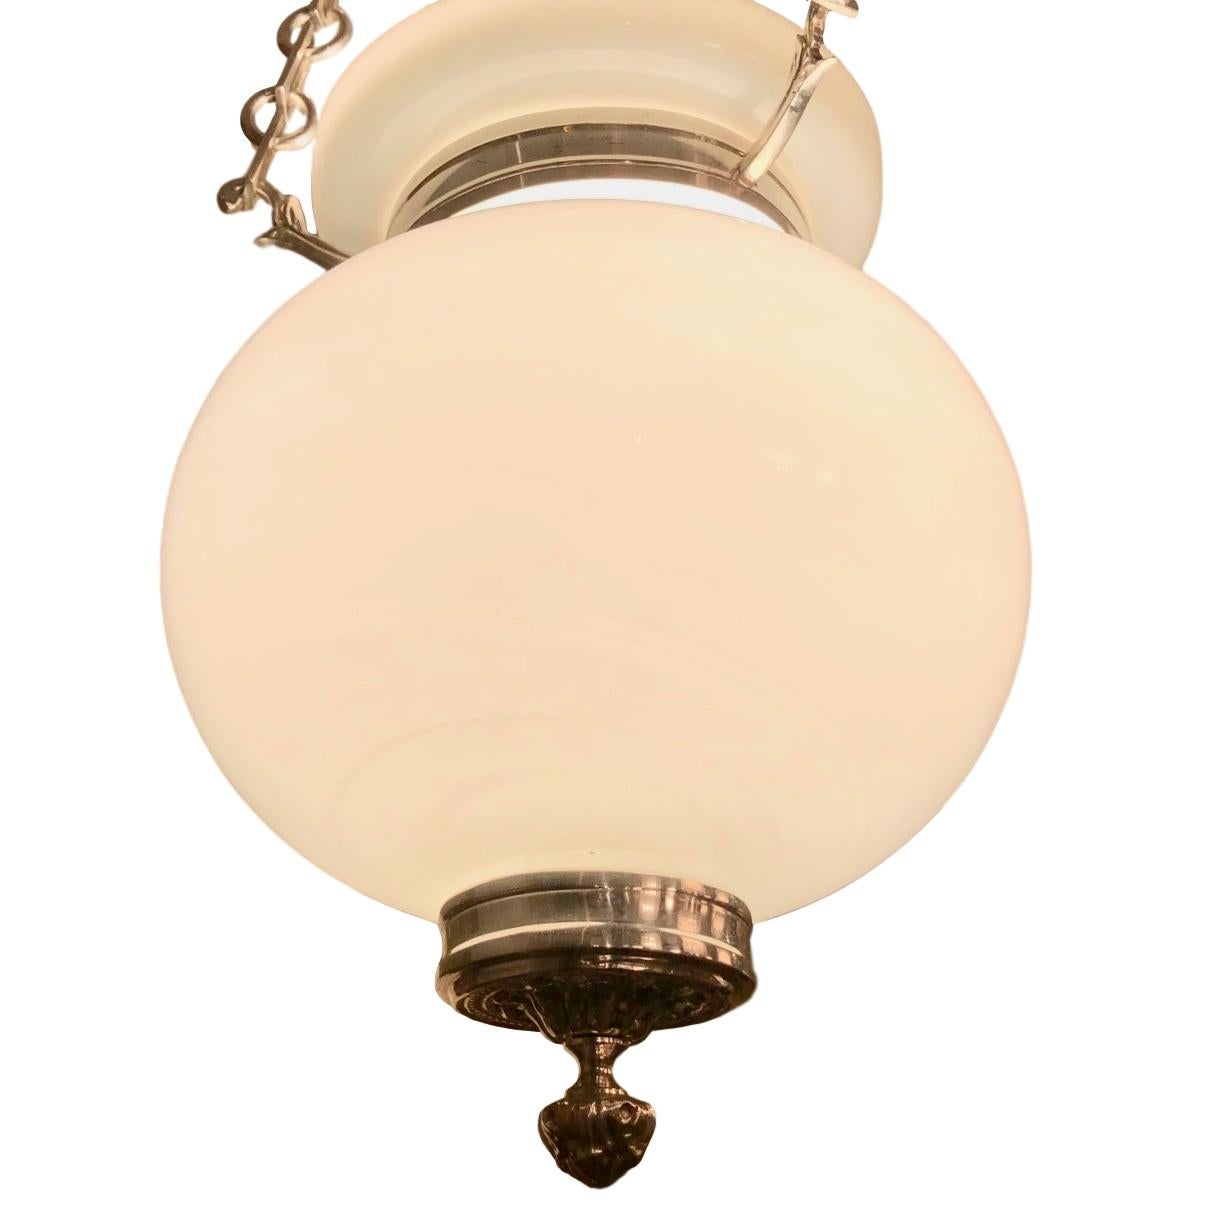 A circa 1920s English milk glass pendant lantern with three interior candelabra lights.

Measurements:
Current drop (height can be adjusted): 27